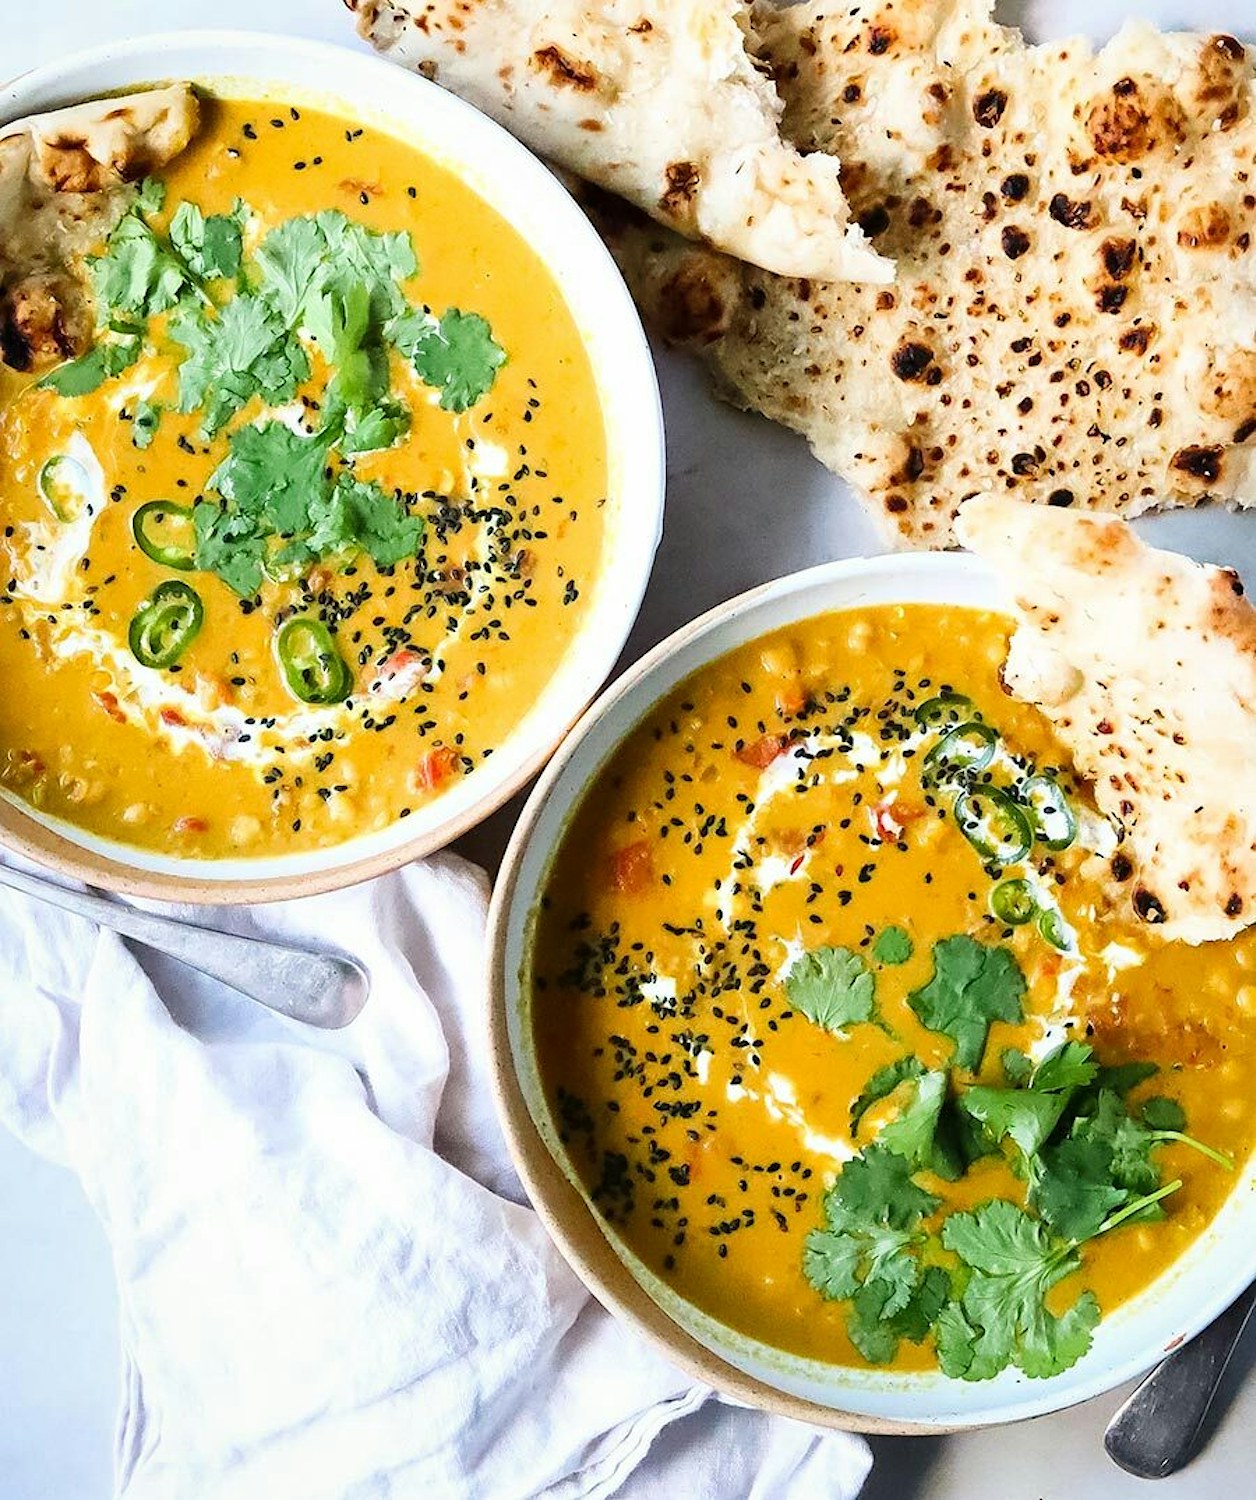 Lentil and Chickpea, Coconut Curried Soup